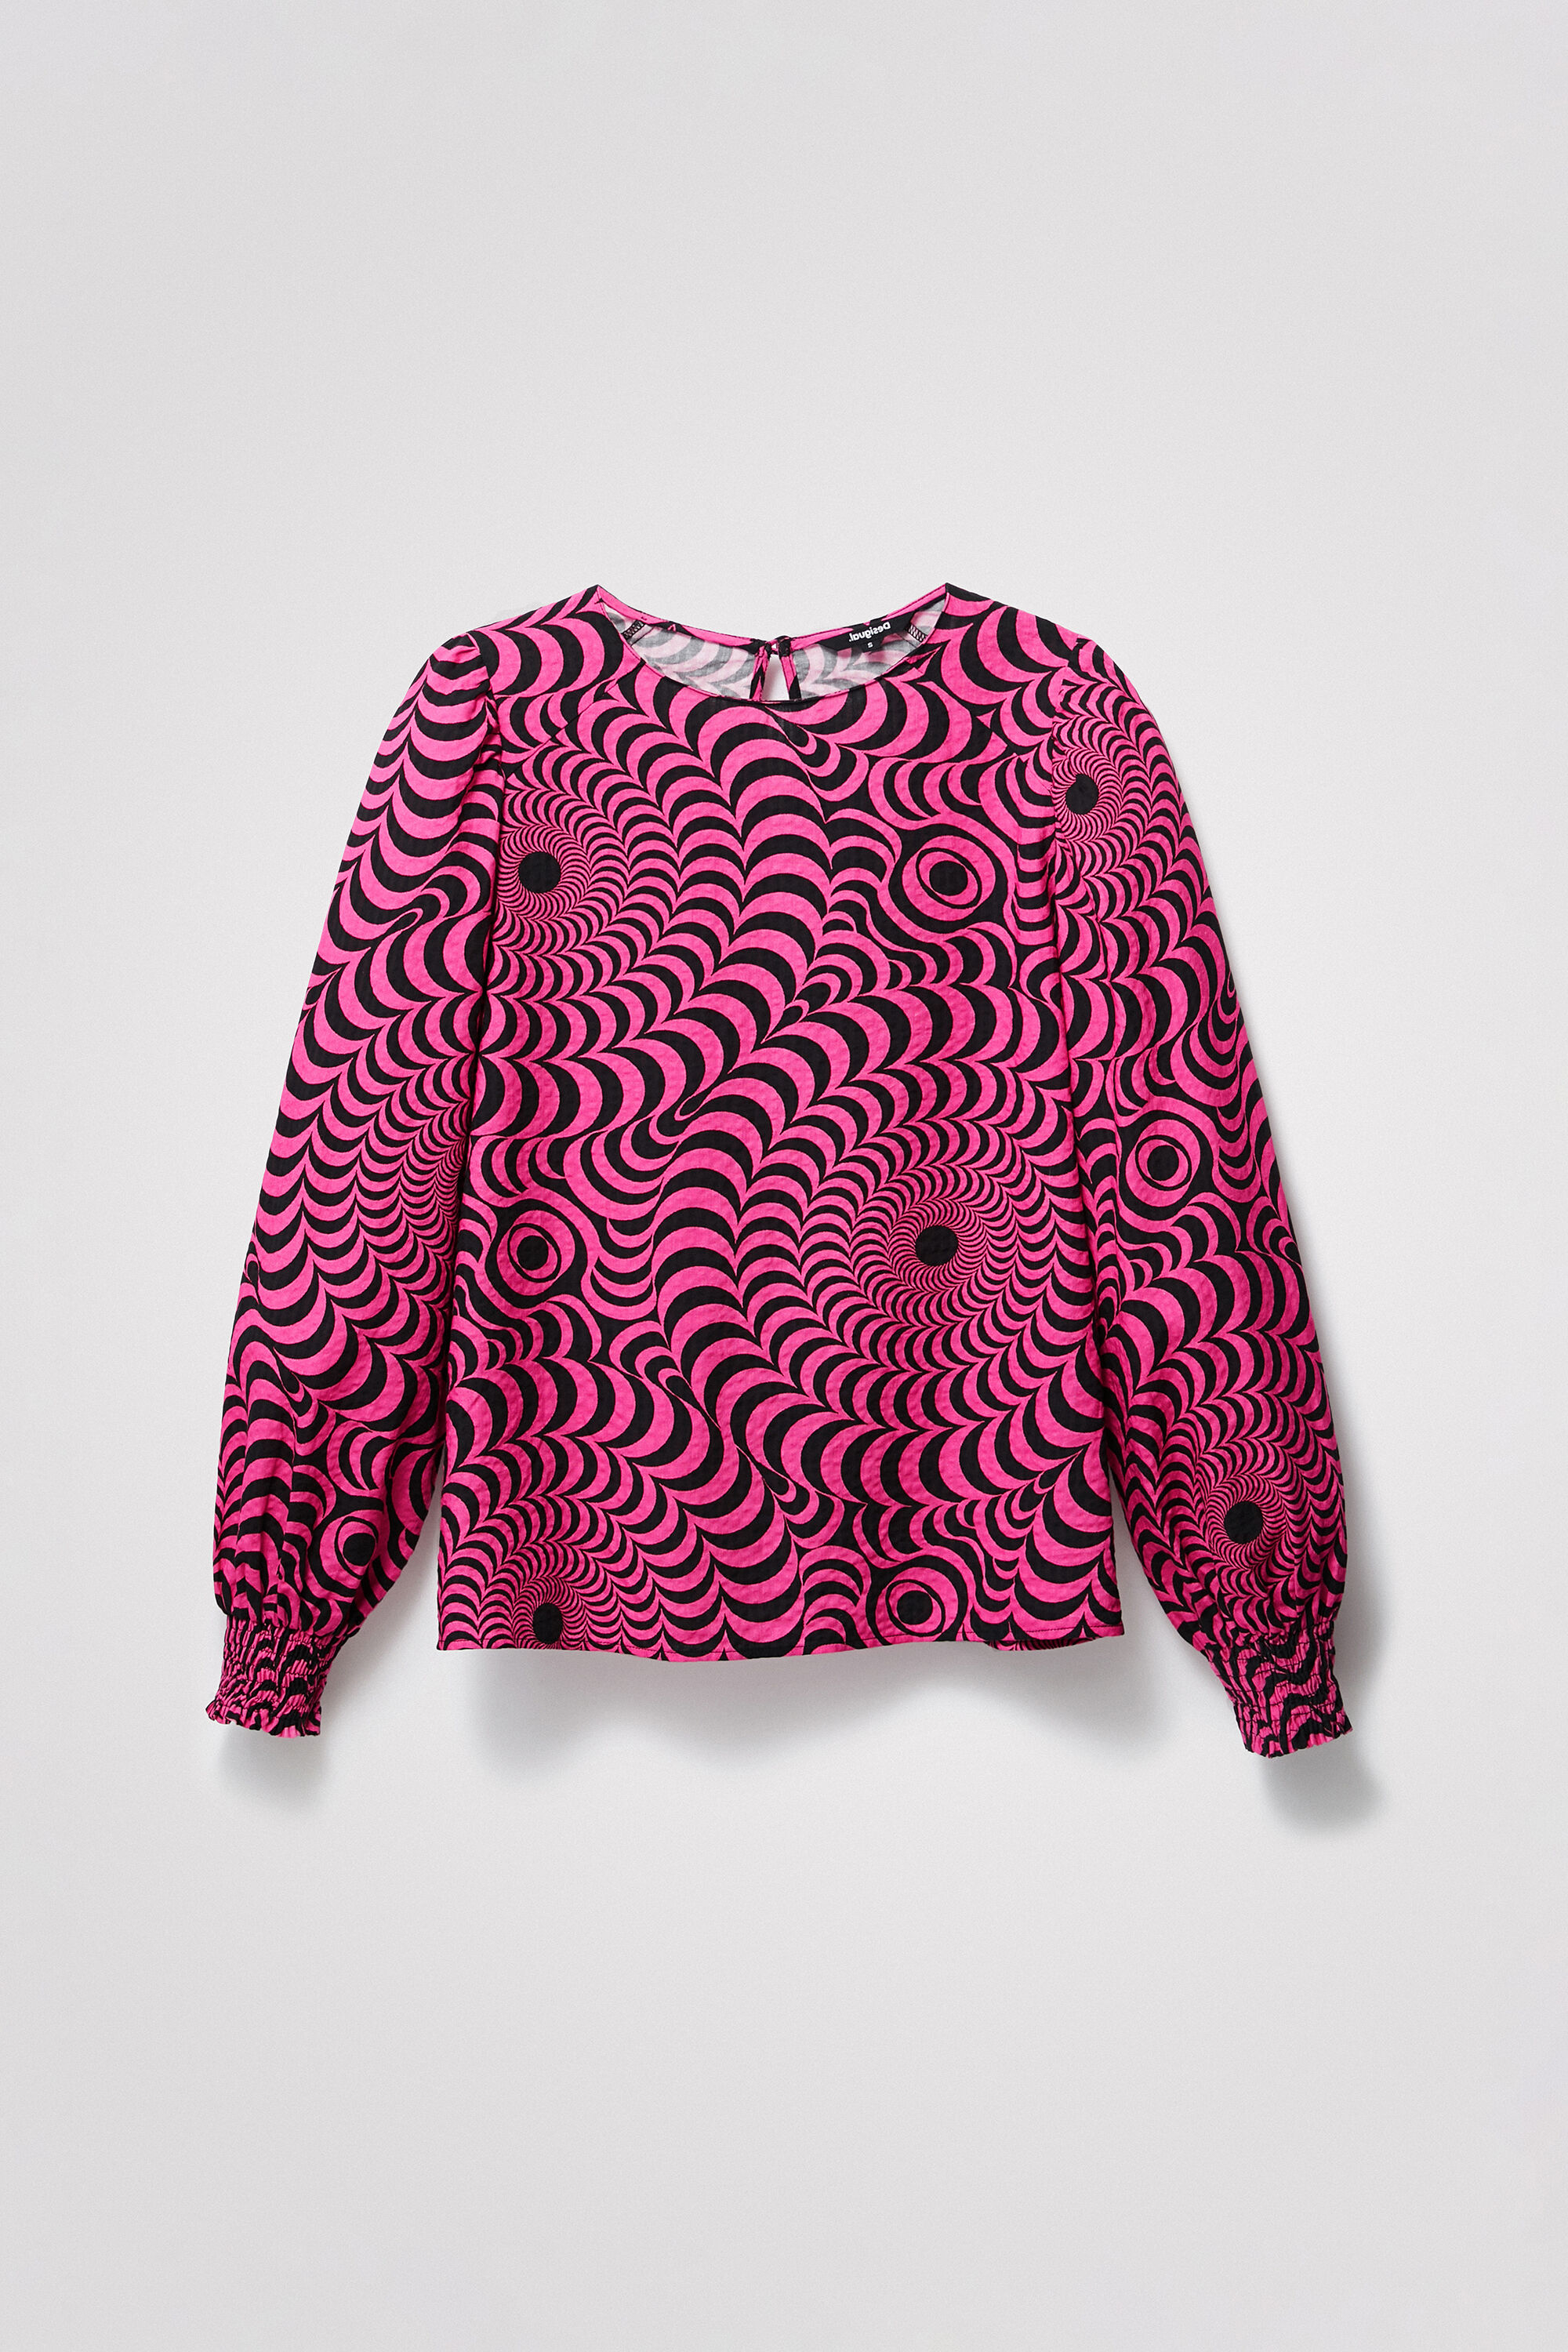 Psychedelic textured blouse - MATERIAL FINISHES - S